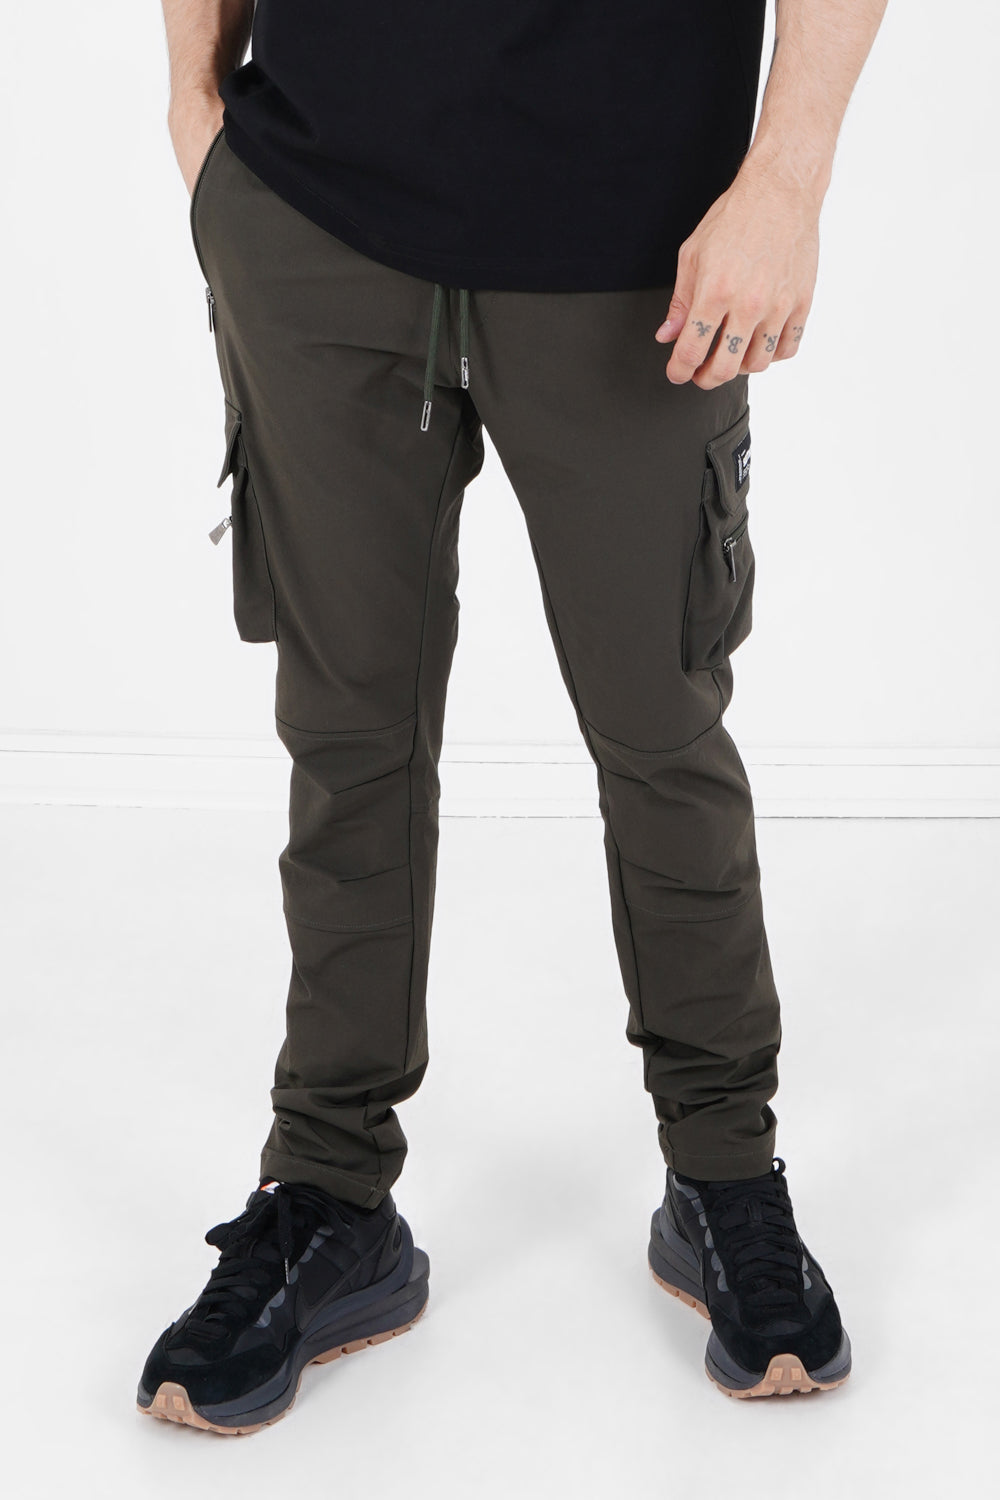 Replying to @coledump07 fave 6 pocket cargo pants RESTOCKED✨ #cargop